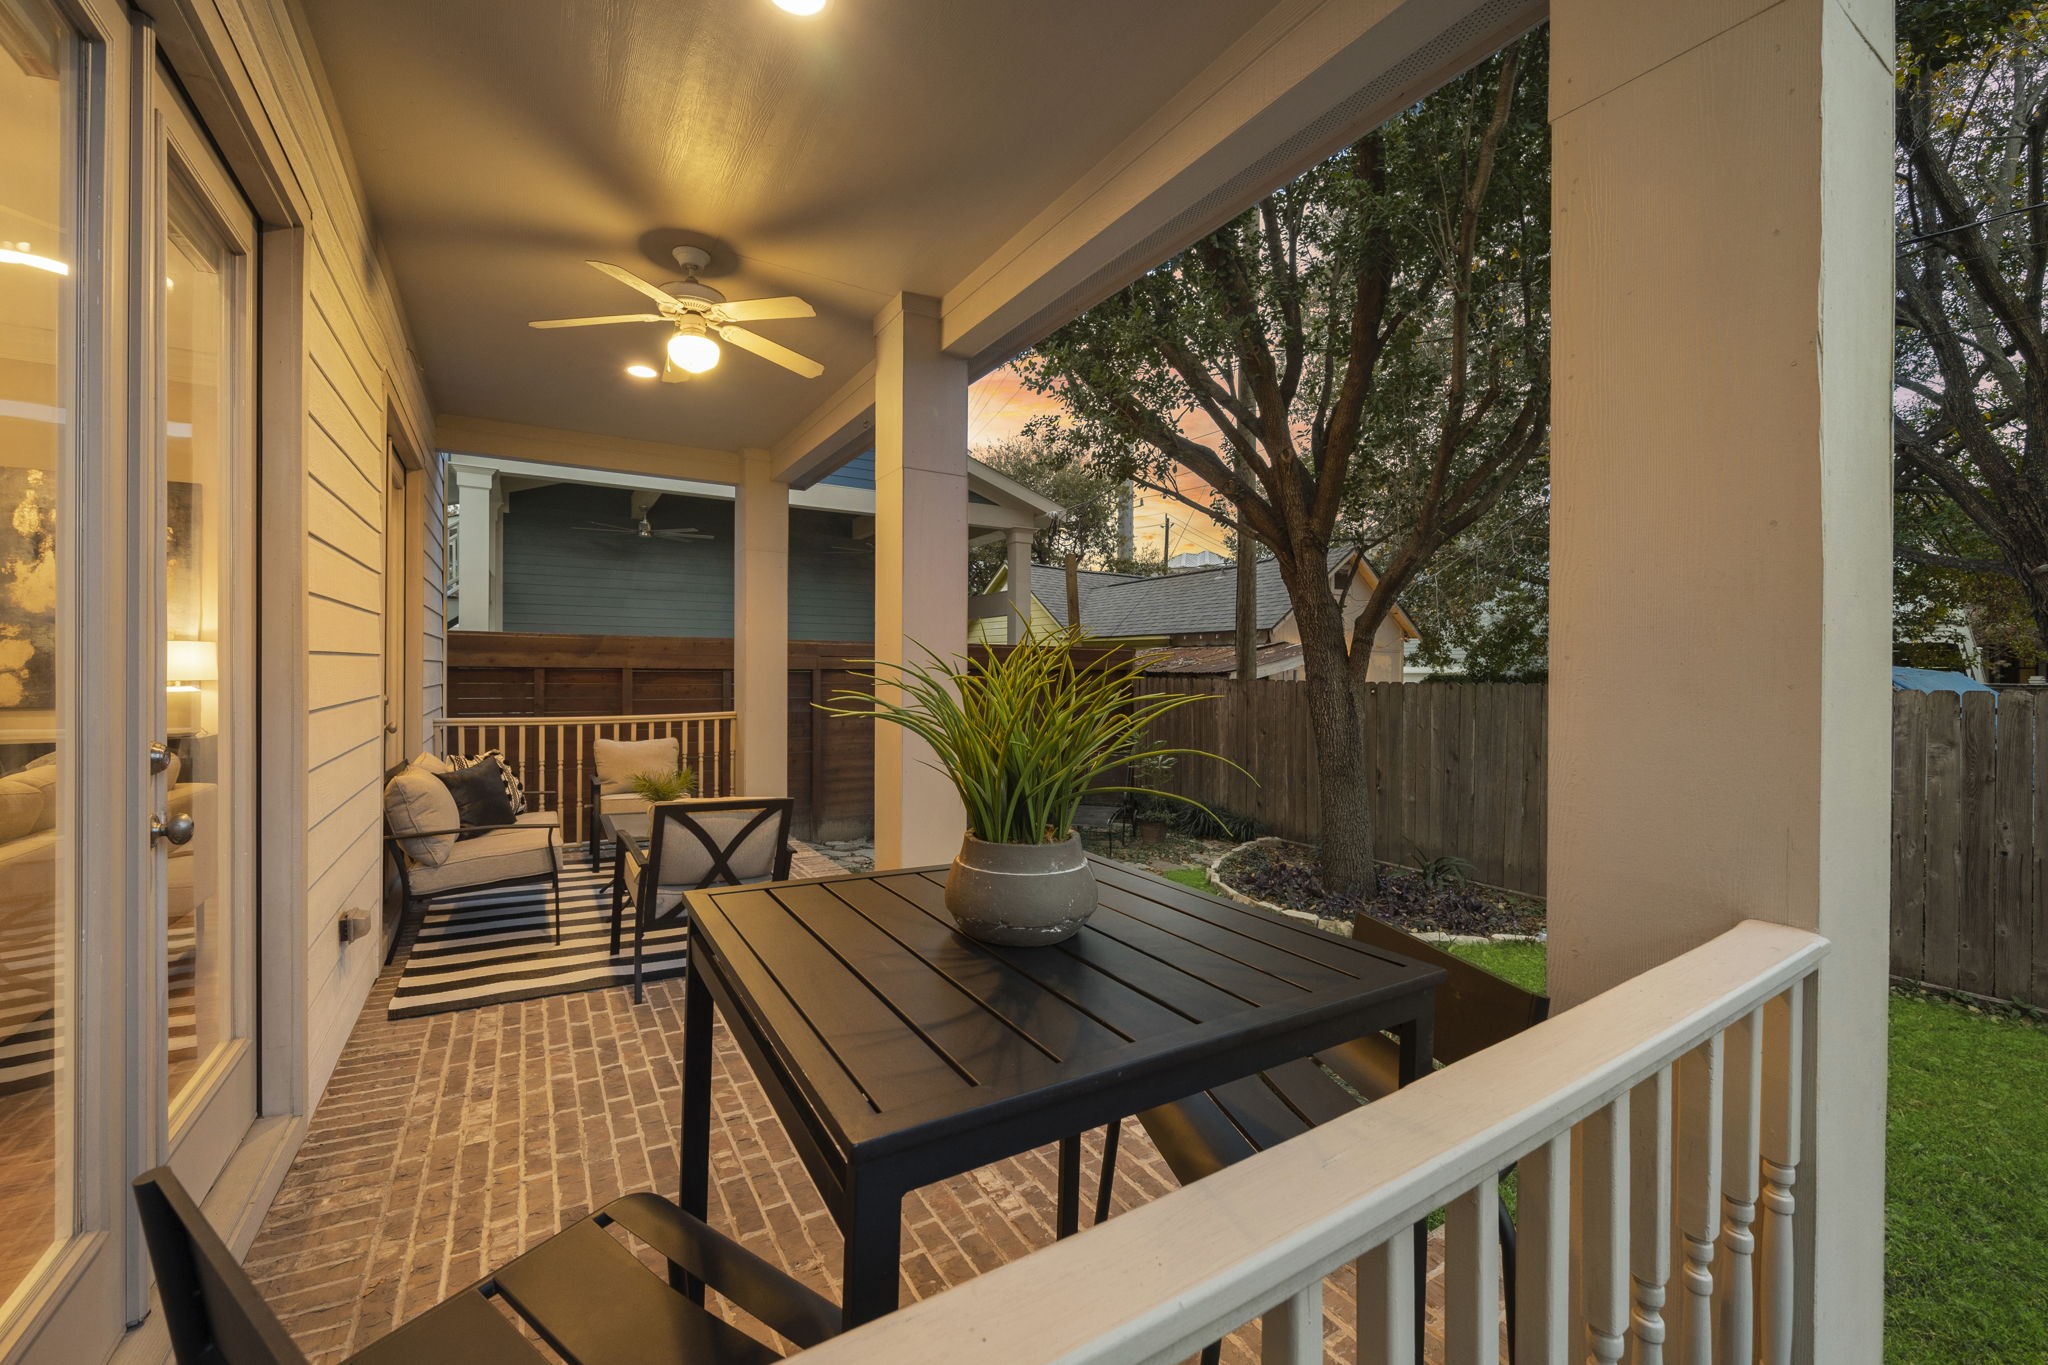 Right off the living area, the private backyard offers abundant space for outdoor seating and plenty of room for your very own garden.